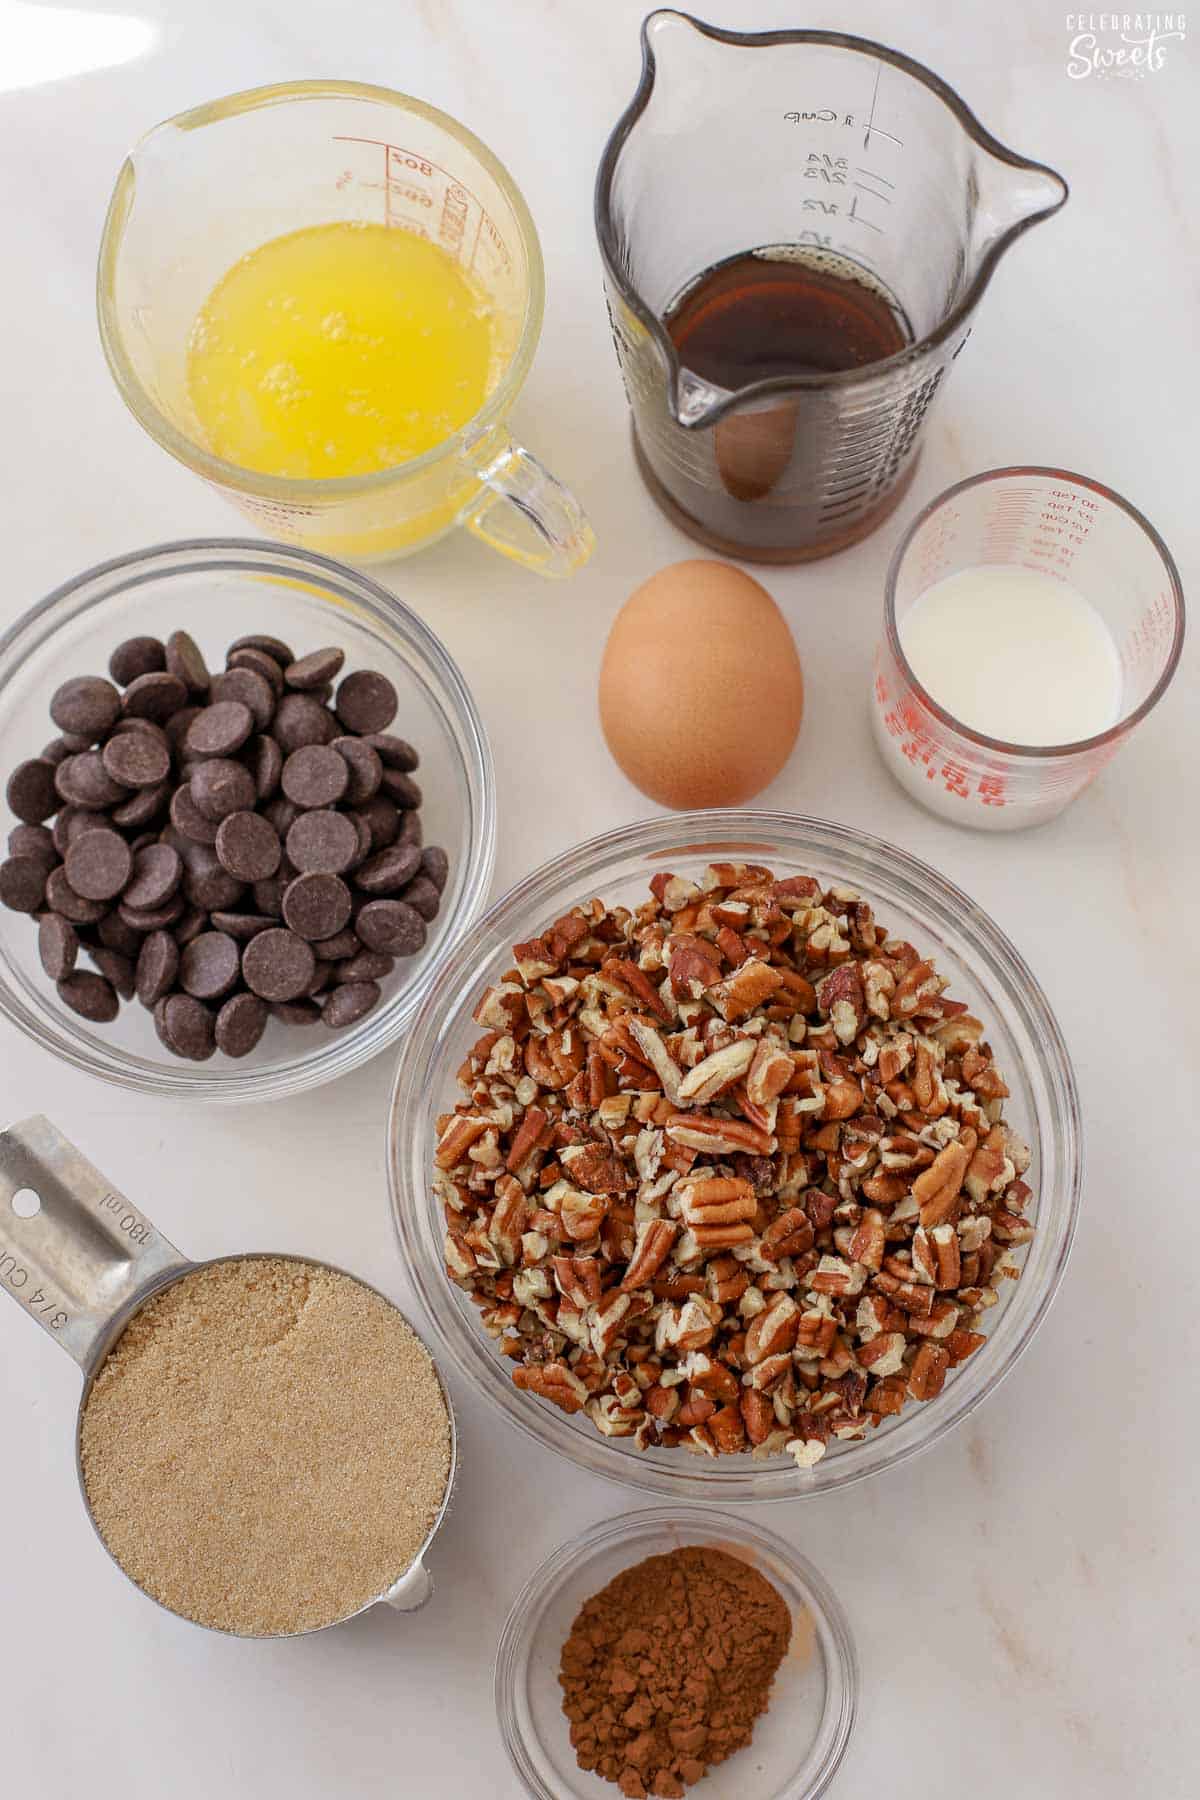 Ingredients for chocolate pecan pie bars: brown sugar, syrup, pecan, chocolate chips, melted butter, egg.